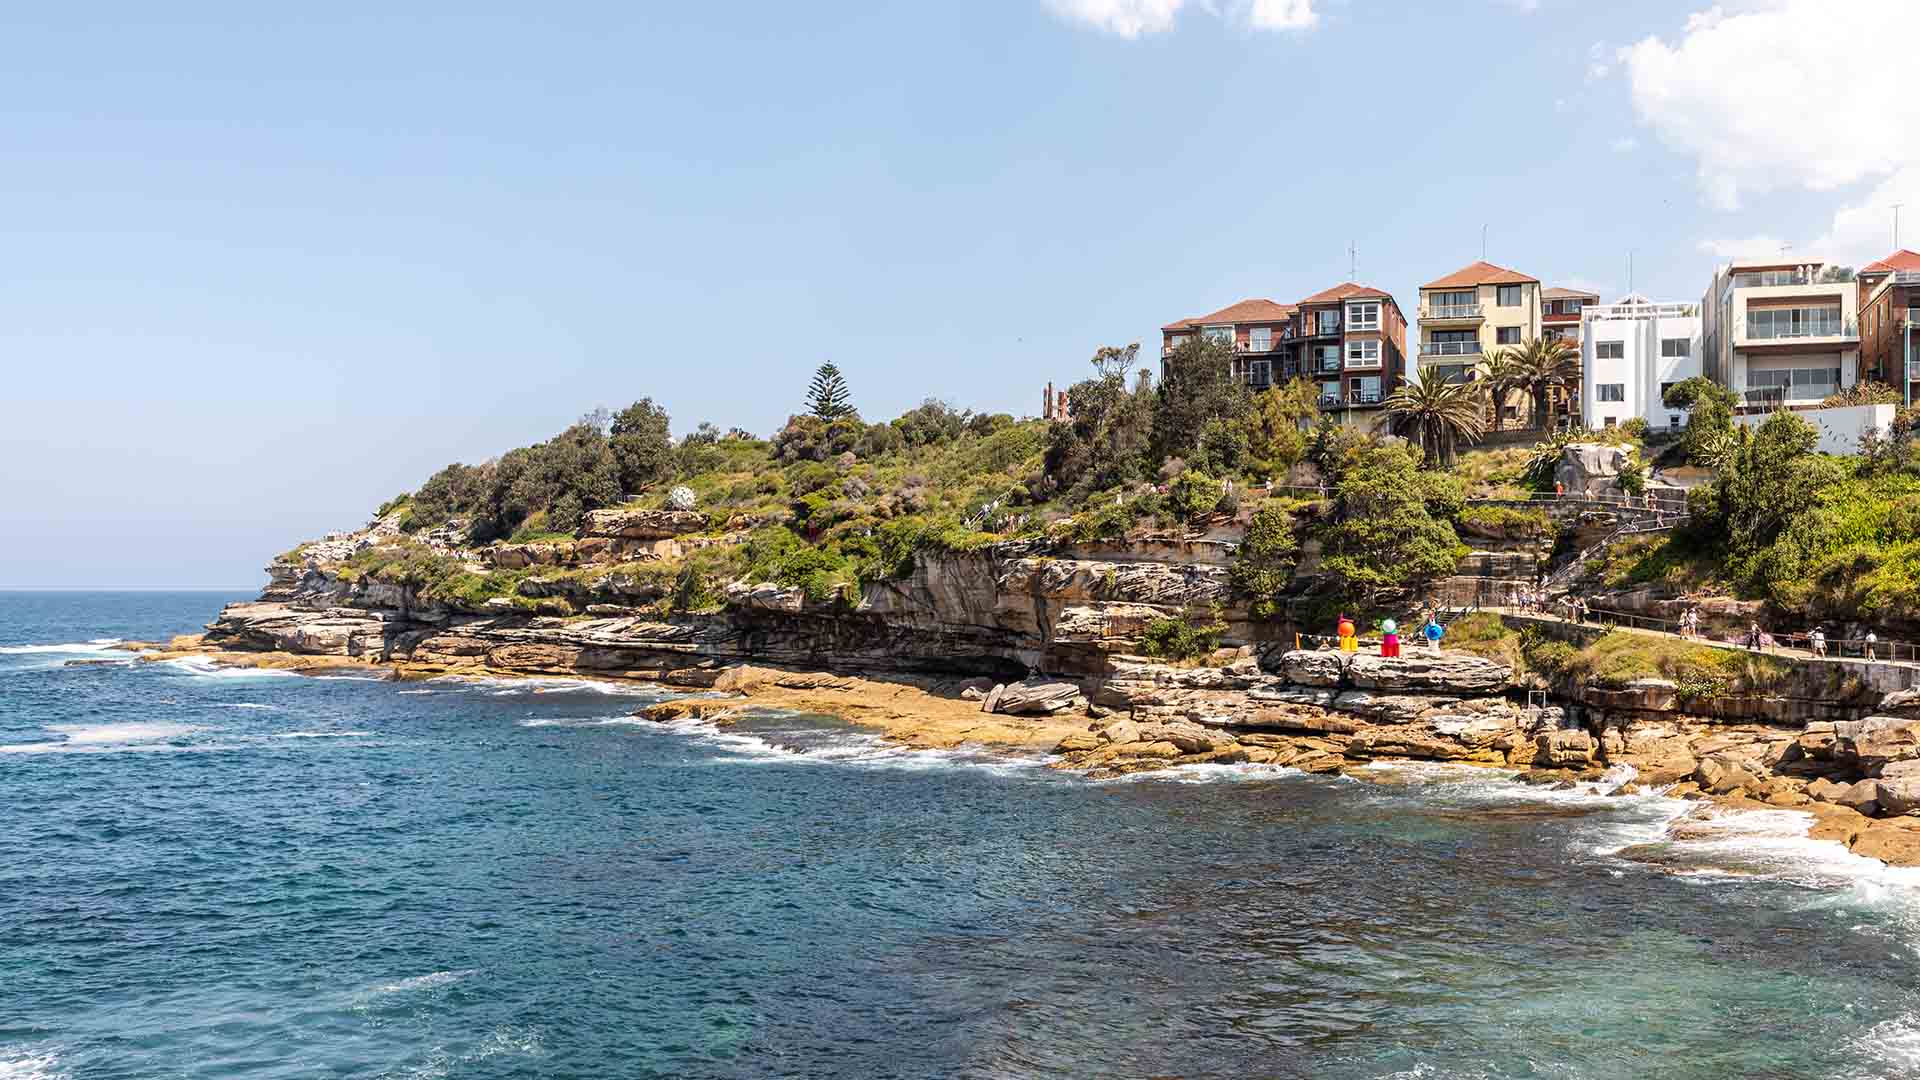 The Bondi to Bronte Coastal Walk Has Been Closed in the Interest of Public Safety